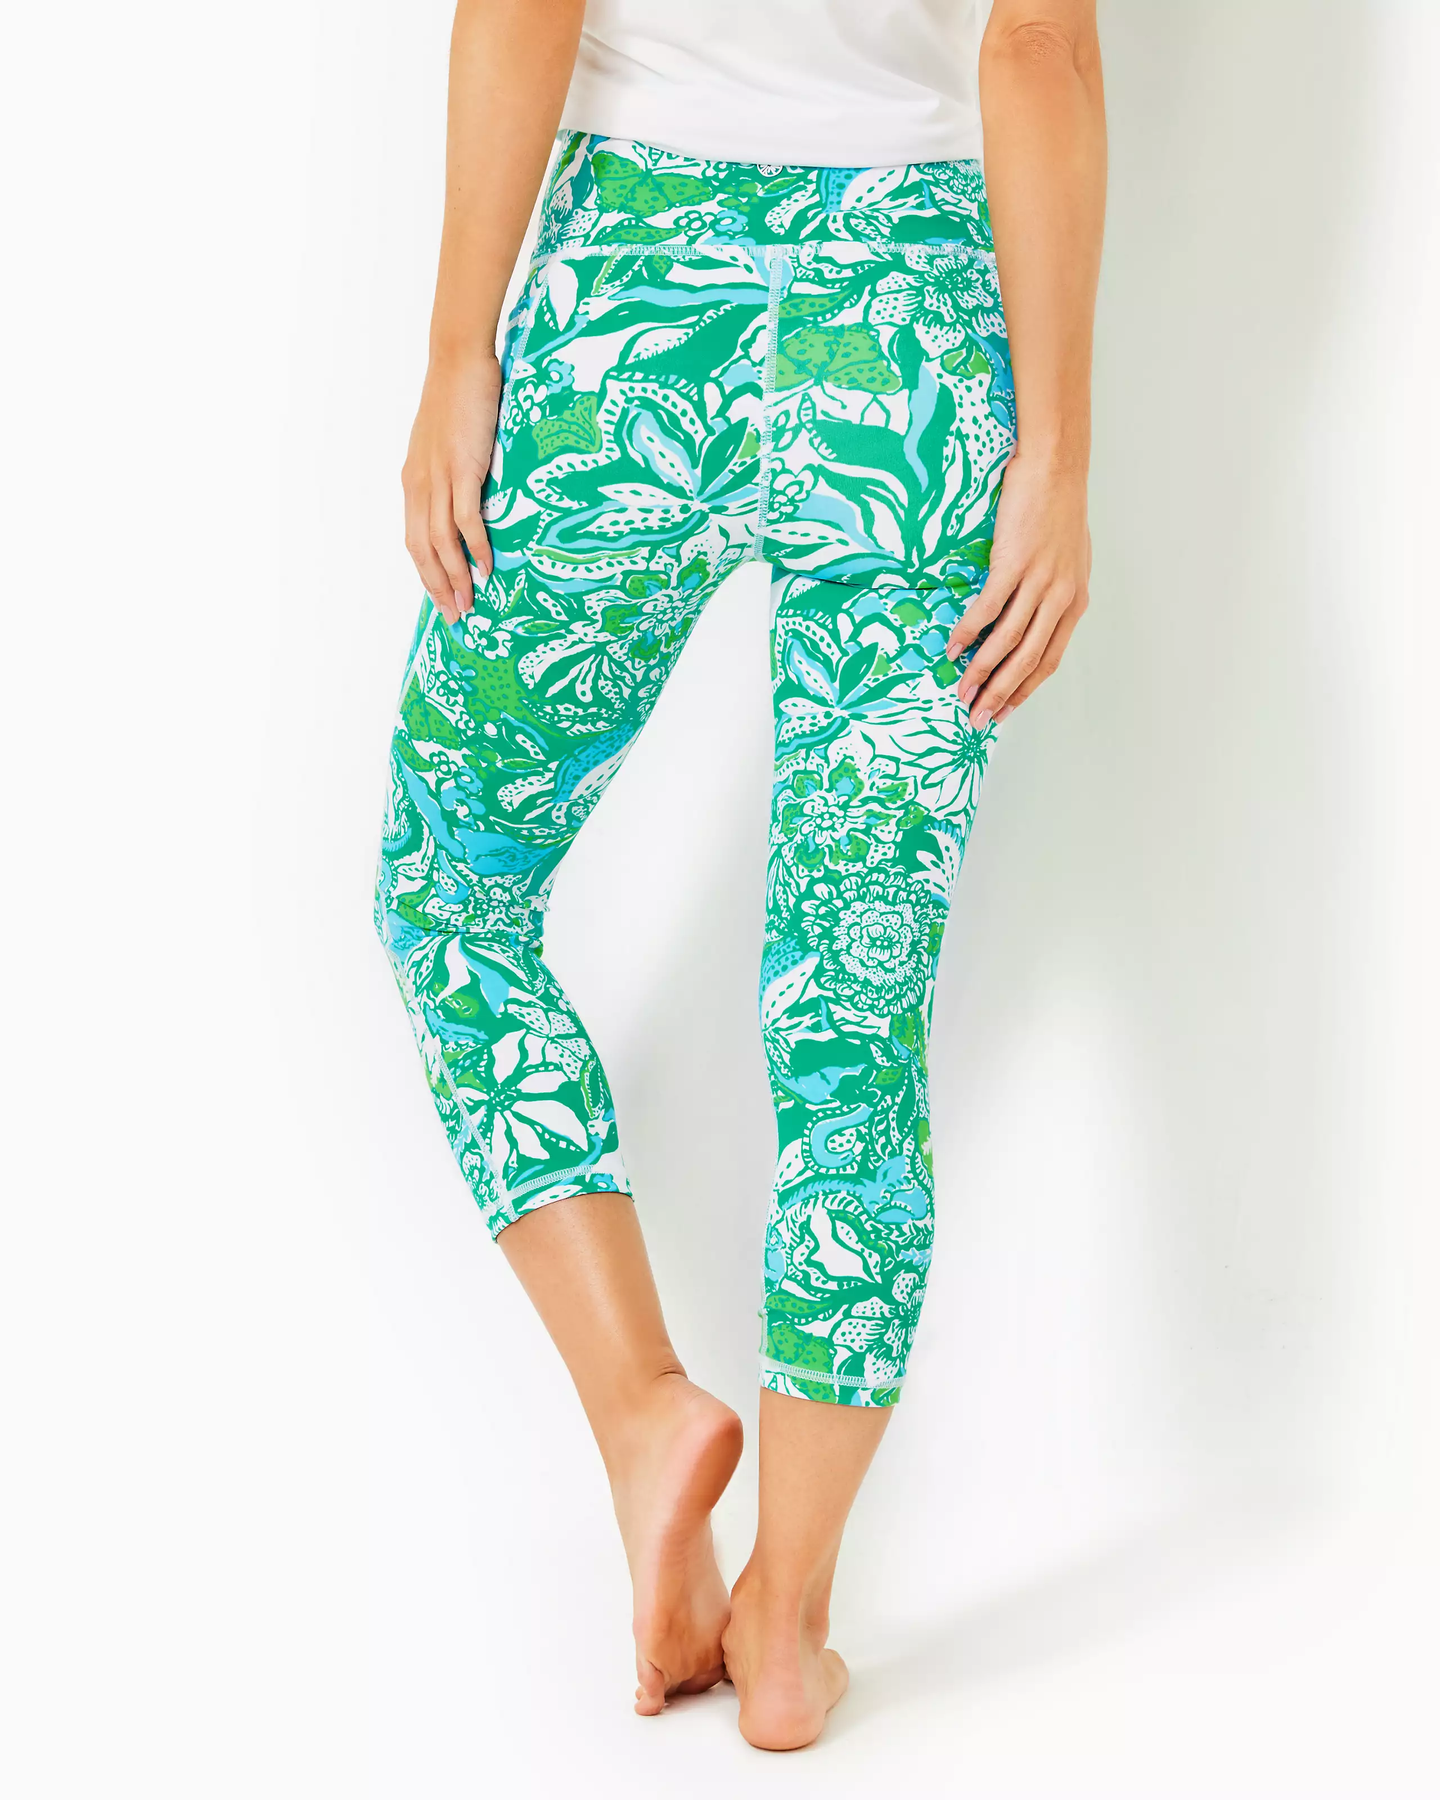 Lilly Pulitzer UPF 50+ Luxletic 21 South Beach High Rise Crop